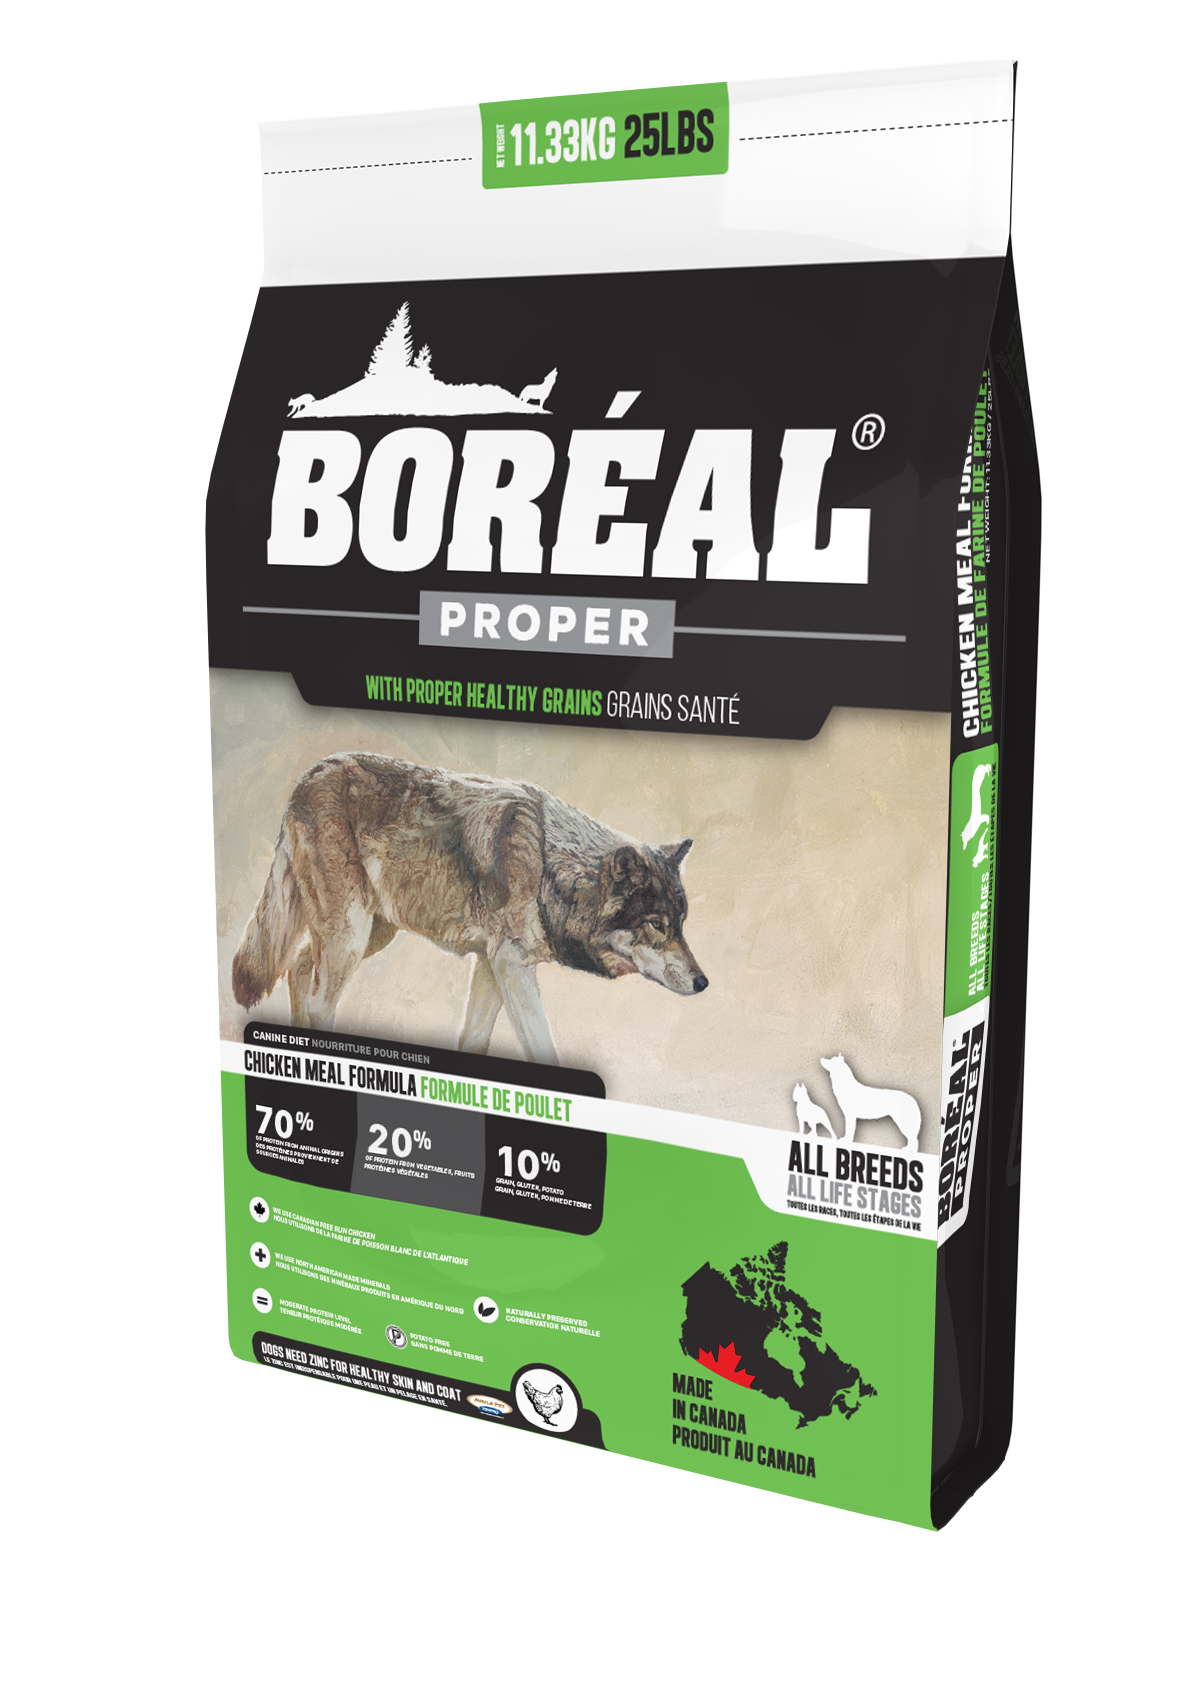 BORÉAL PROPER CHICKEN MEAL LOW CARB GRAINS for Dogs 25 lbs.